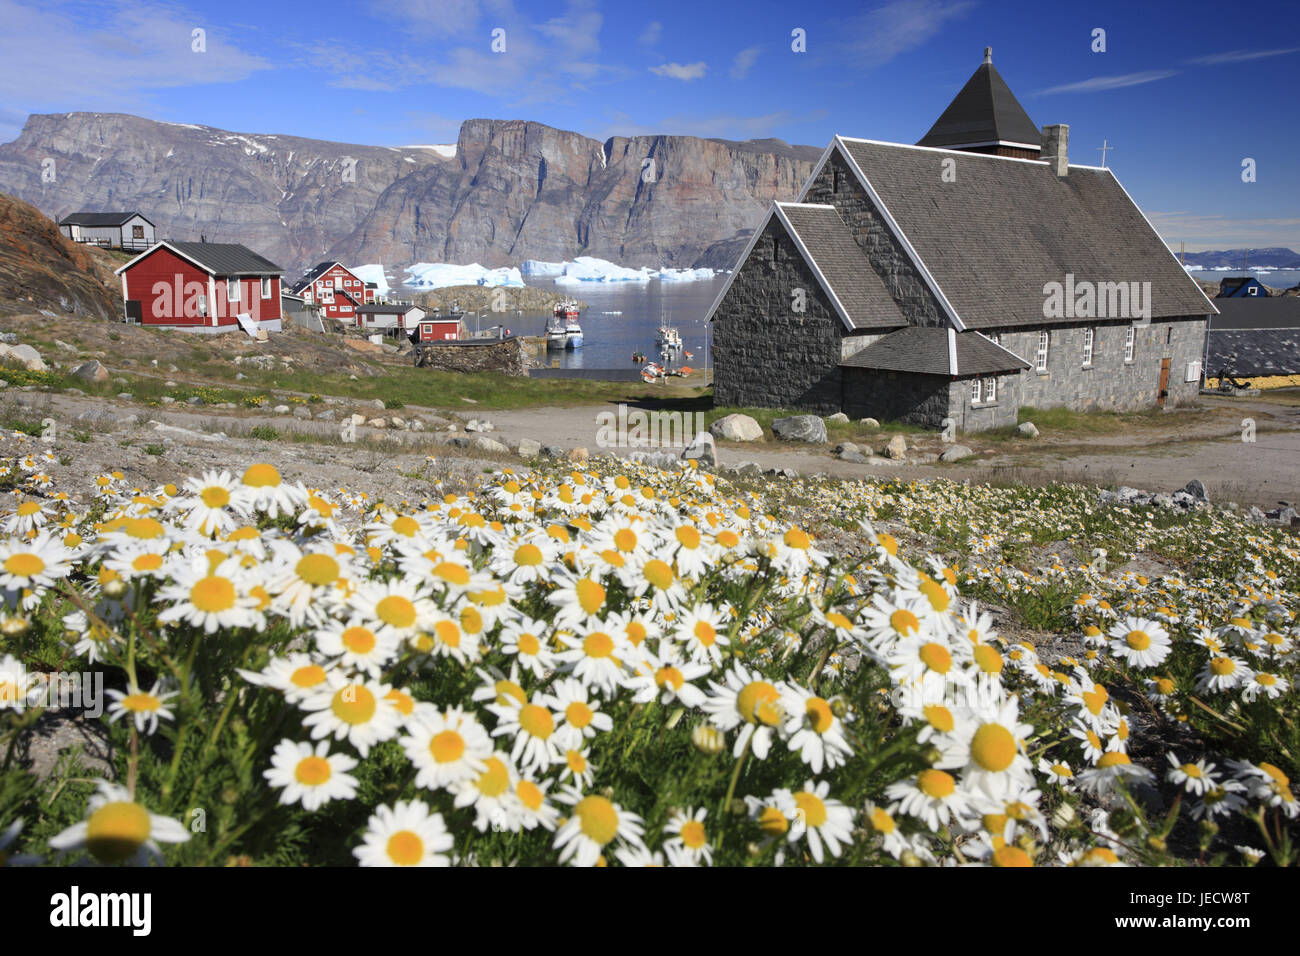 Greenland, Uummannaq, local view, church, margin rites, Northern Greenland, destination, sea, the Arctic, mountains, icebergs, glacier ice creams, coast, outside, E sharp, water, houses, timber houses, church, sacred construction, faith, religion, Christianity, meadow, flower meadow, flowers, blossom, sunny, Stock Photo